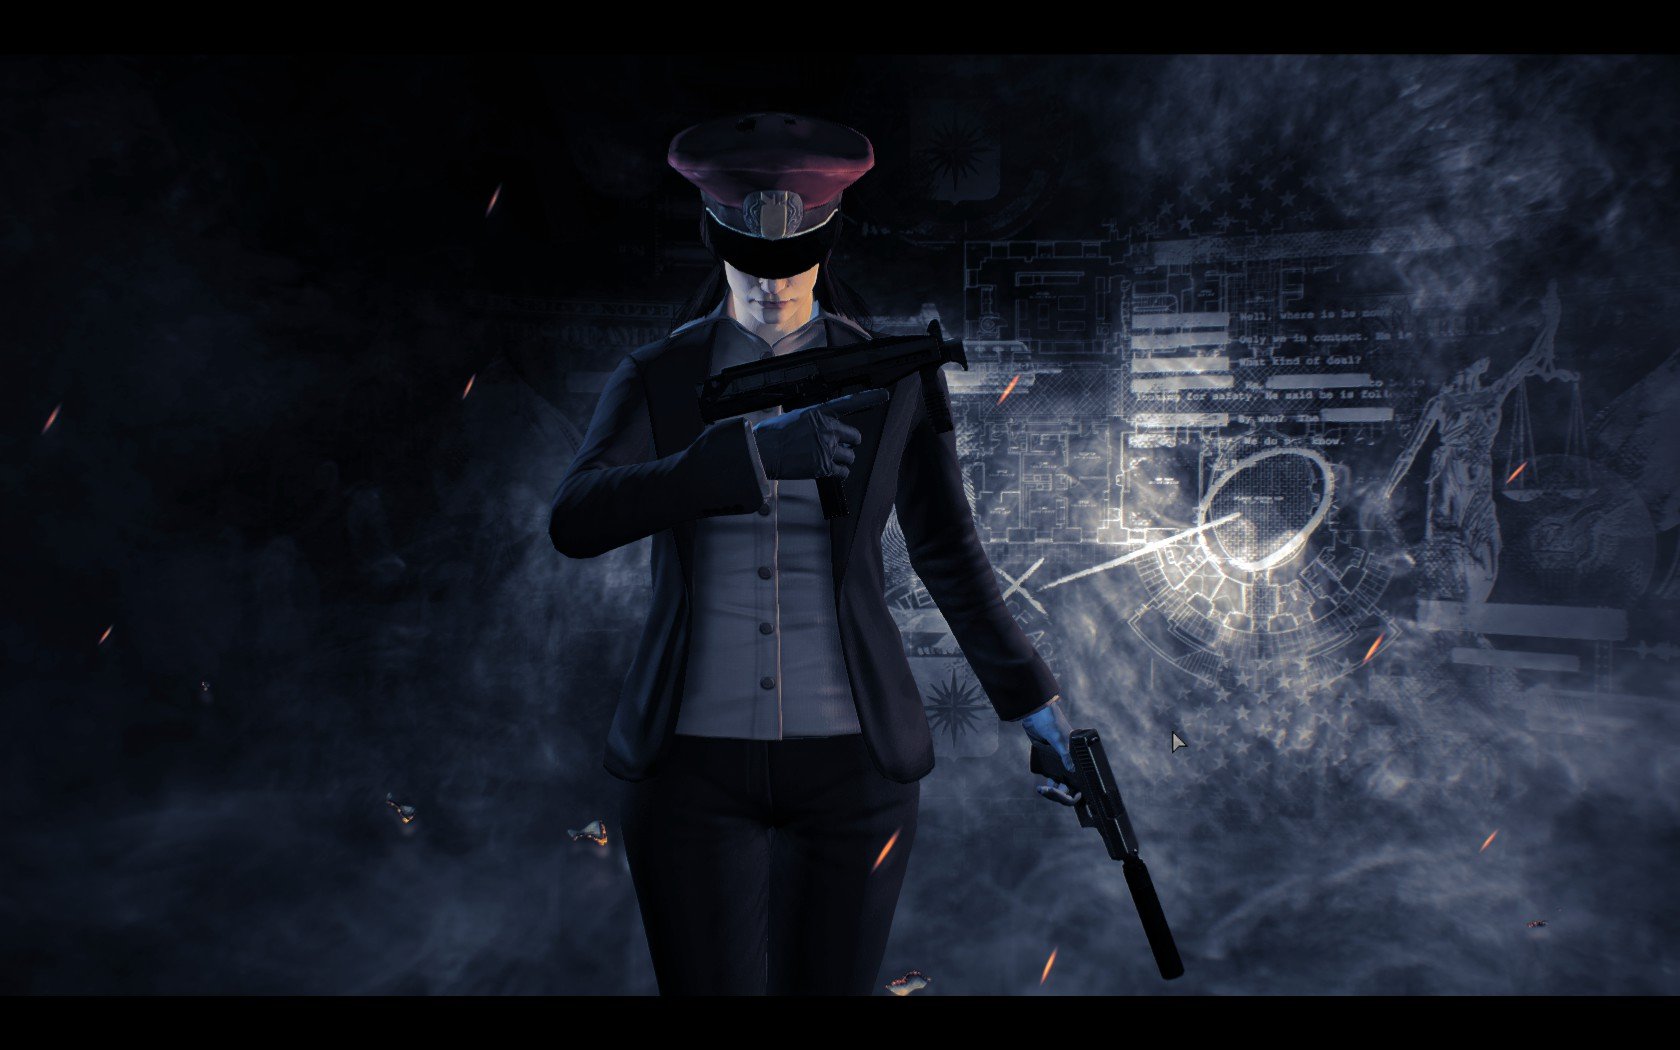 payday 2 wallpaper hd,darkness,screenshot,digital compositing,pc game,movie